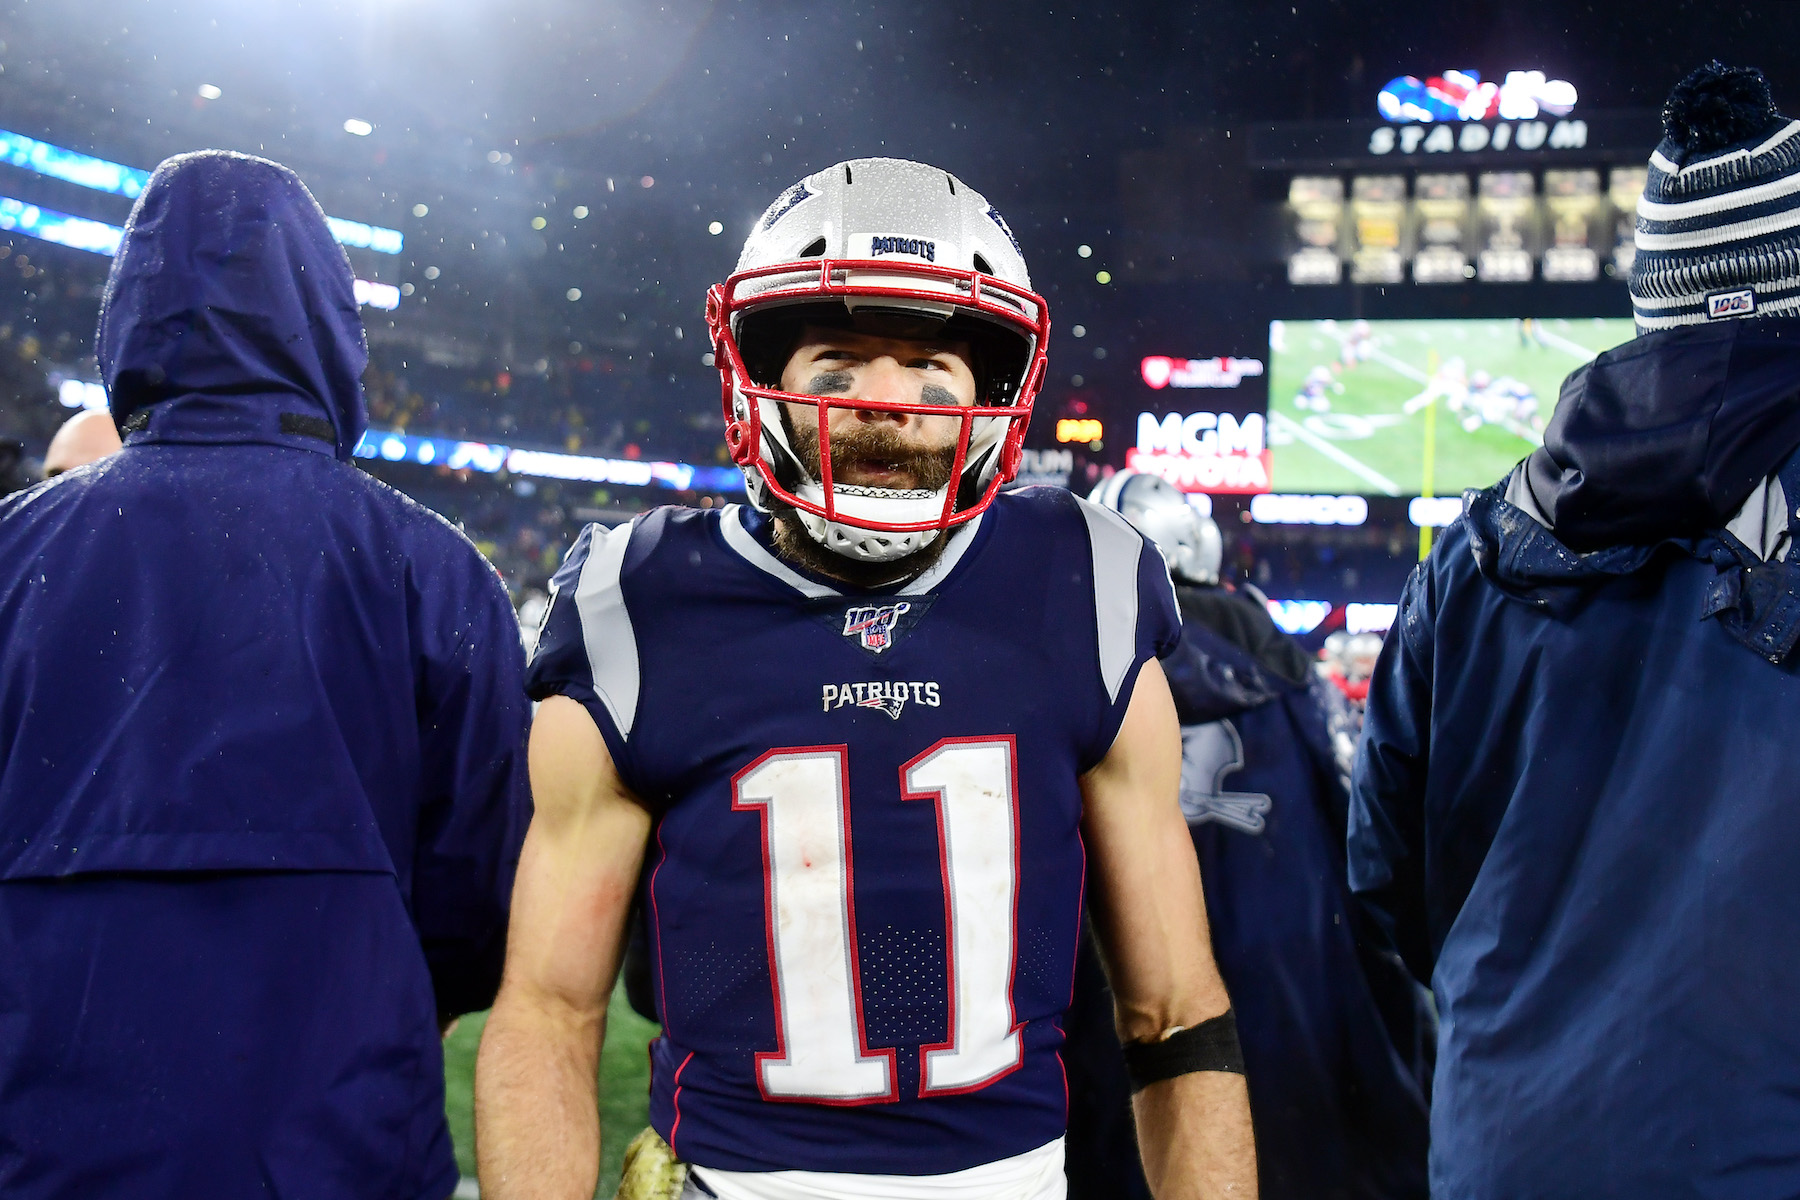 Why ‘Kind of Jewish’ Julian Edelman Spent the NFL Offseason Studying for His Bar Mitzvah